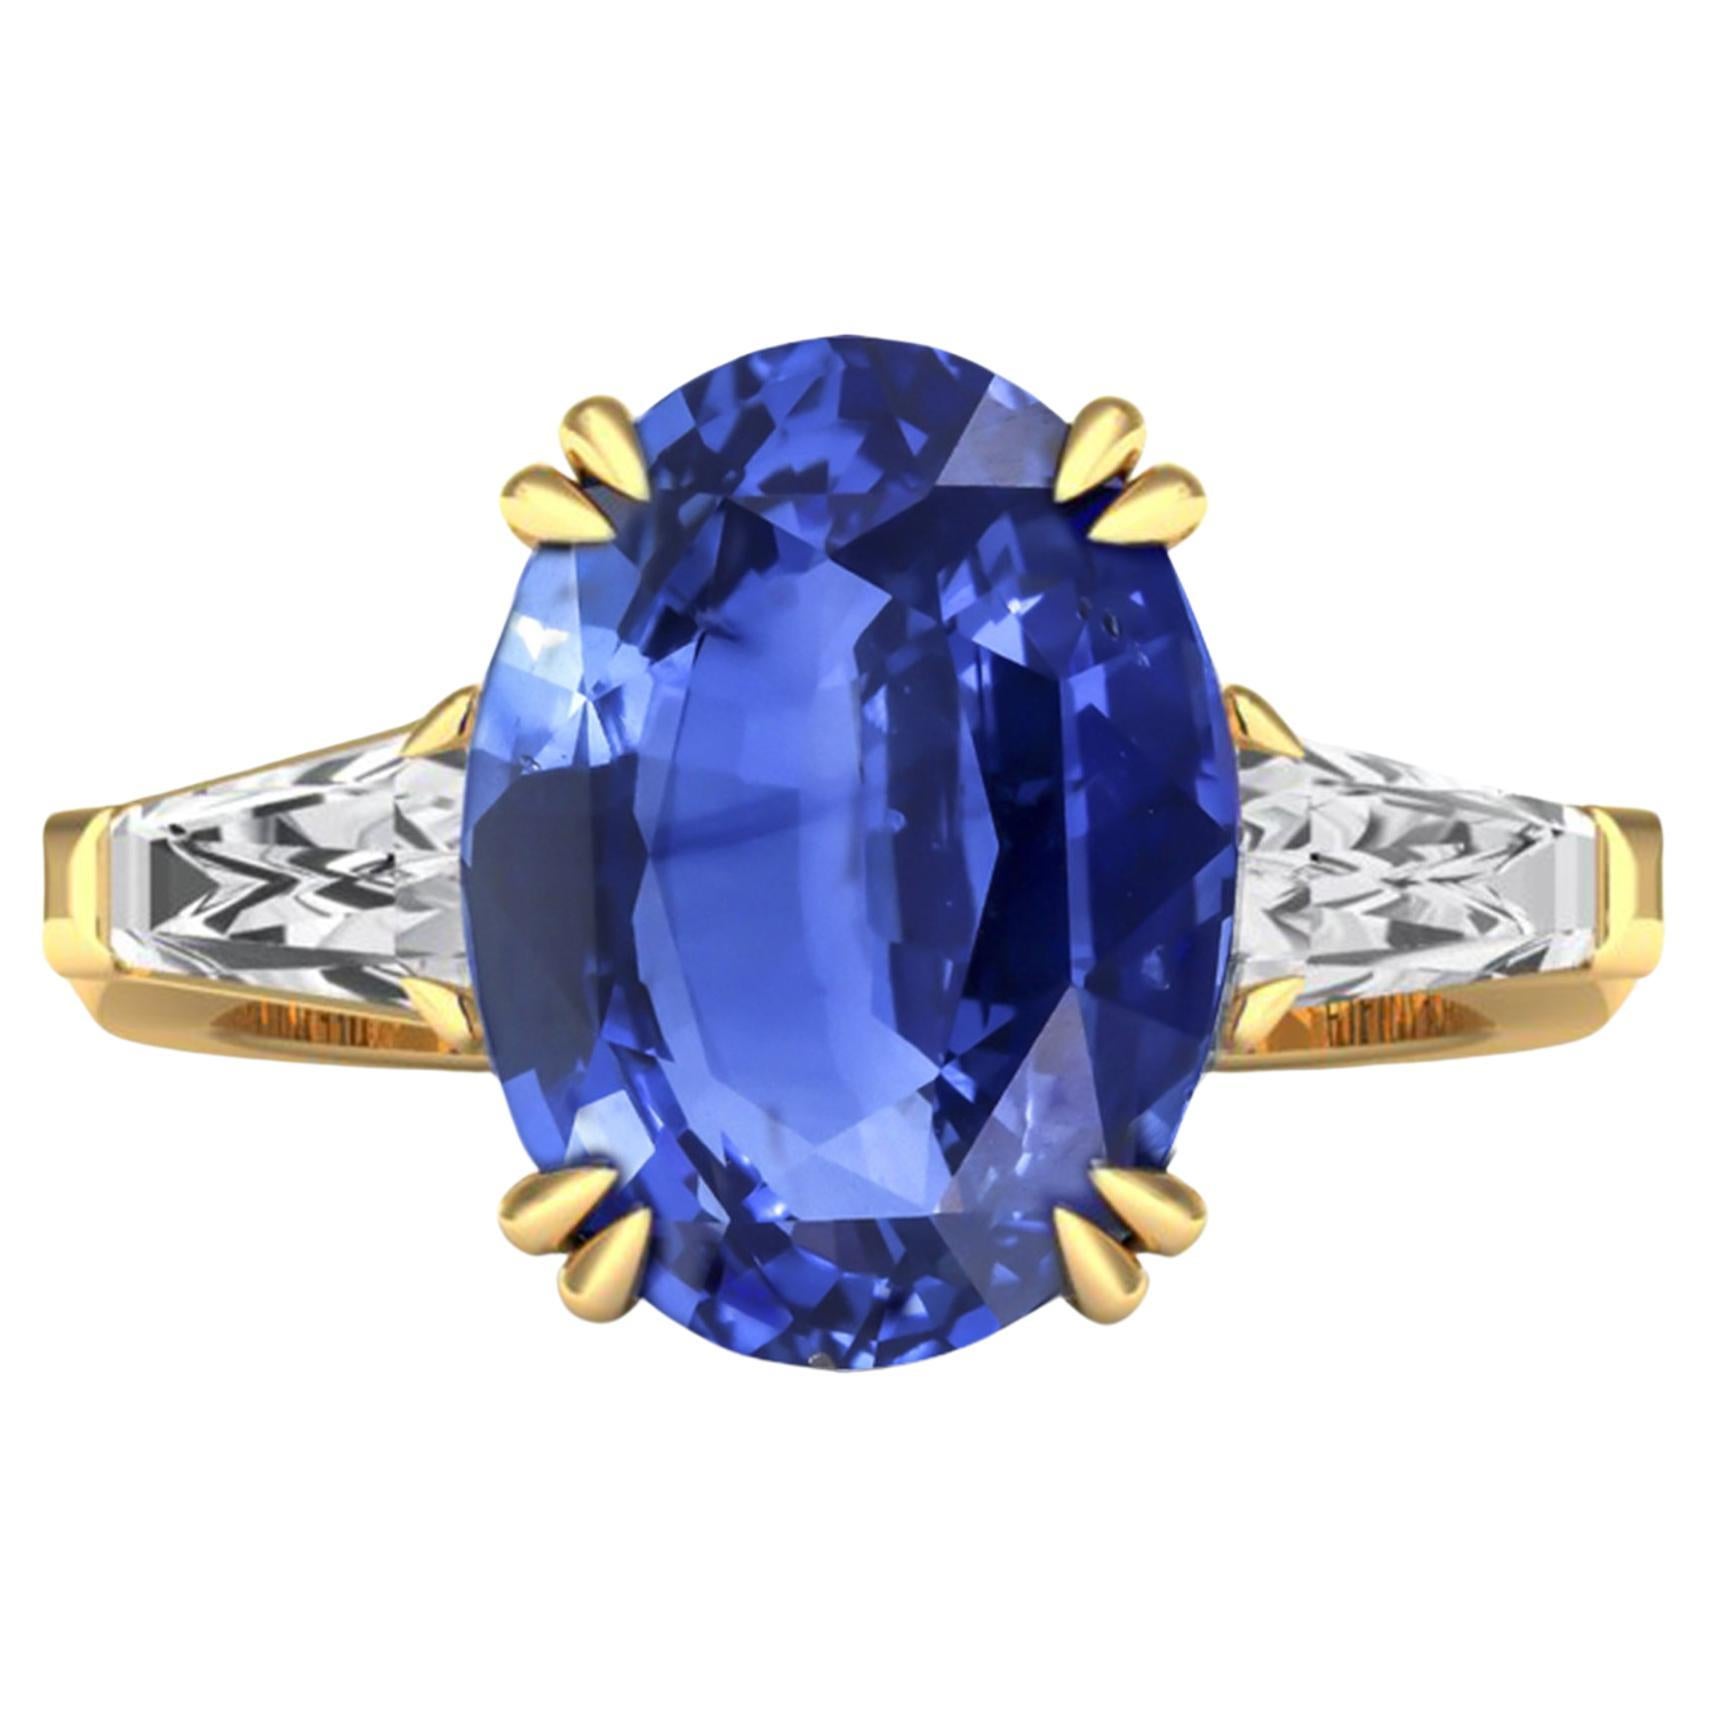 Gemstone: natural untreated, Ceylon Blue Sapphire
AAAA highest heirloom quality 
Weight of Sapphire : 7.5 carats 
Colour Grading: Cornflower Blue 
Conflict free diamonds x 2 
Metal: 18K Gold 
Certificate: Antwerp Laboratory for Gemstone Testing